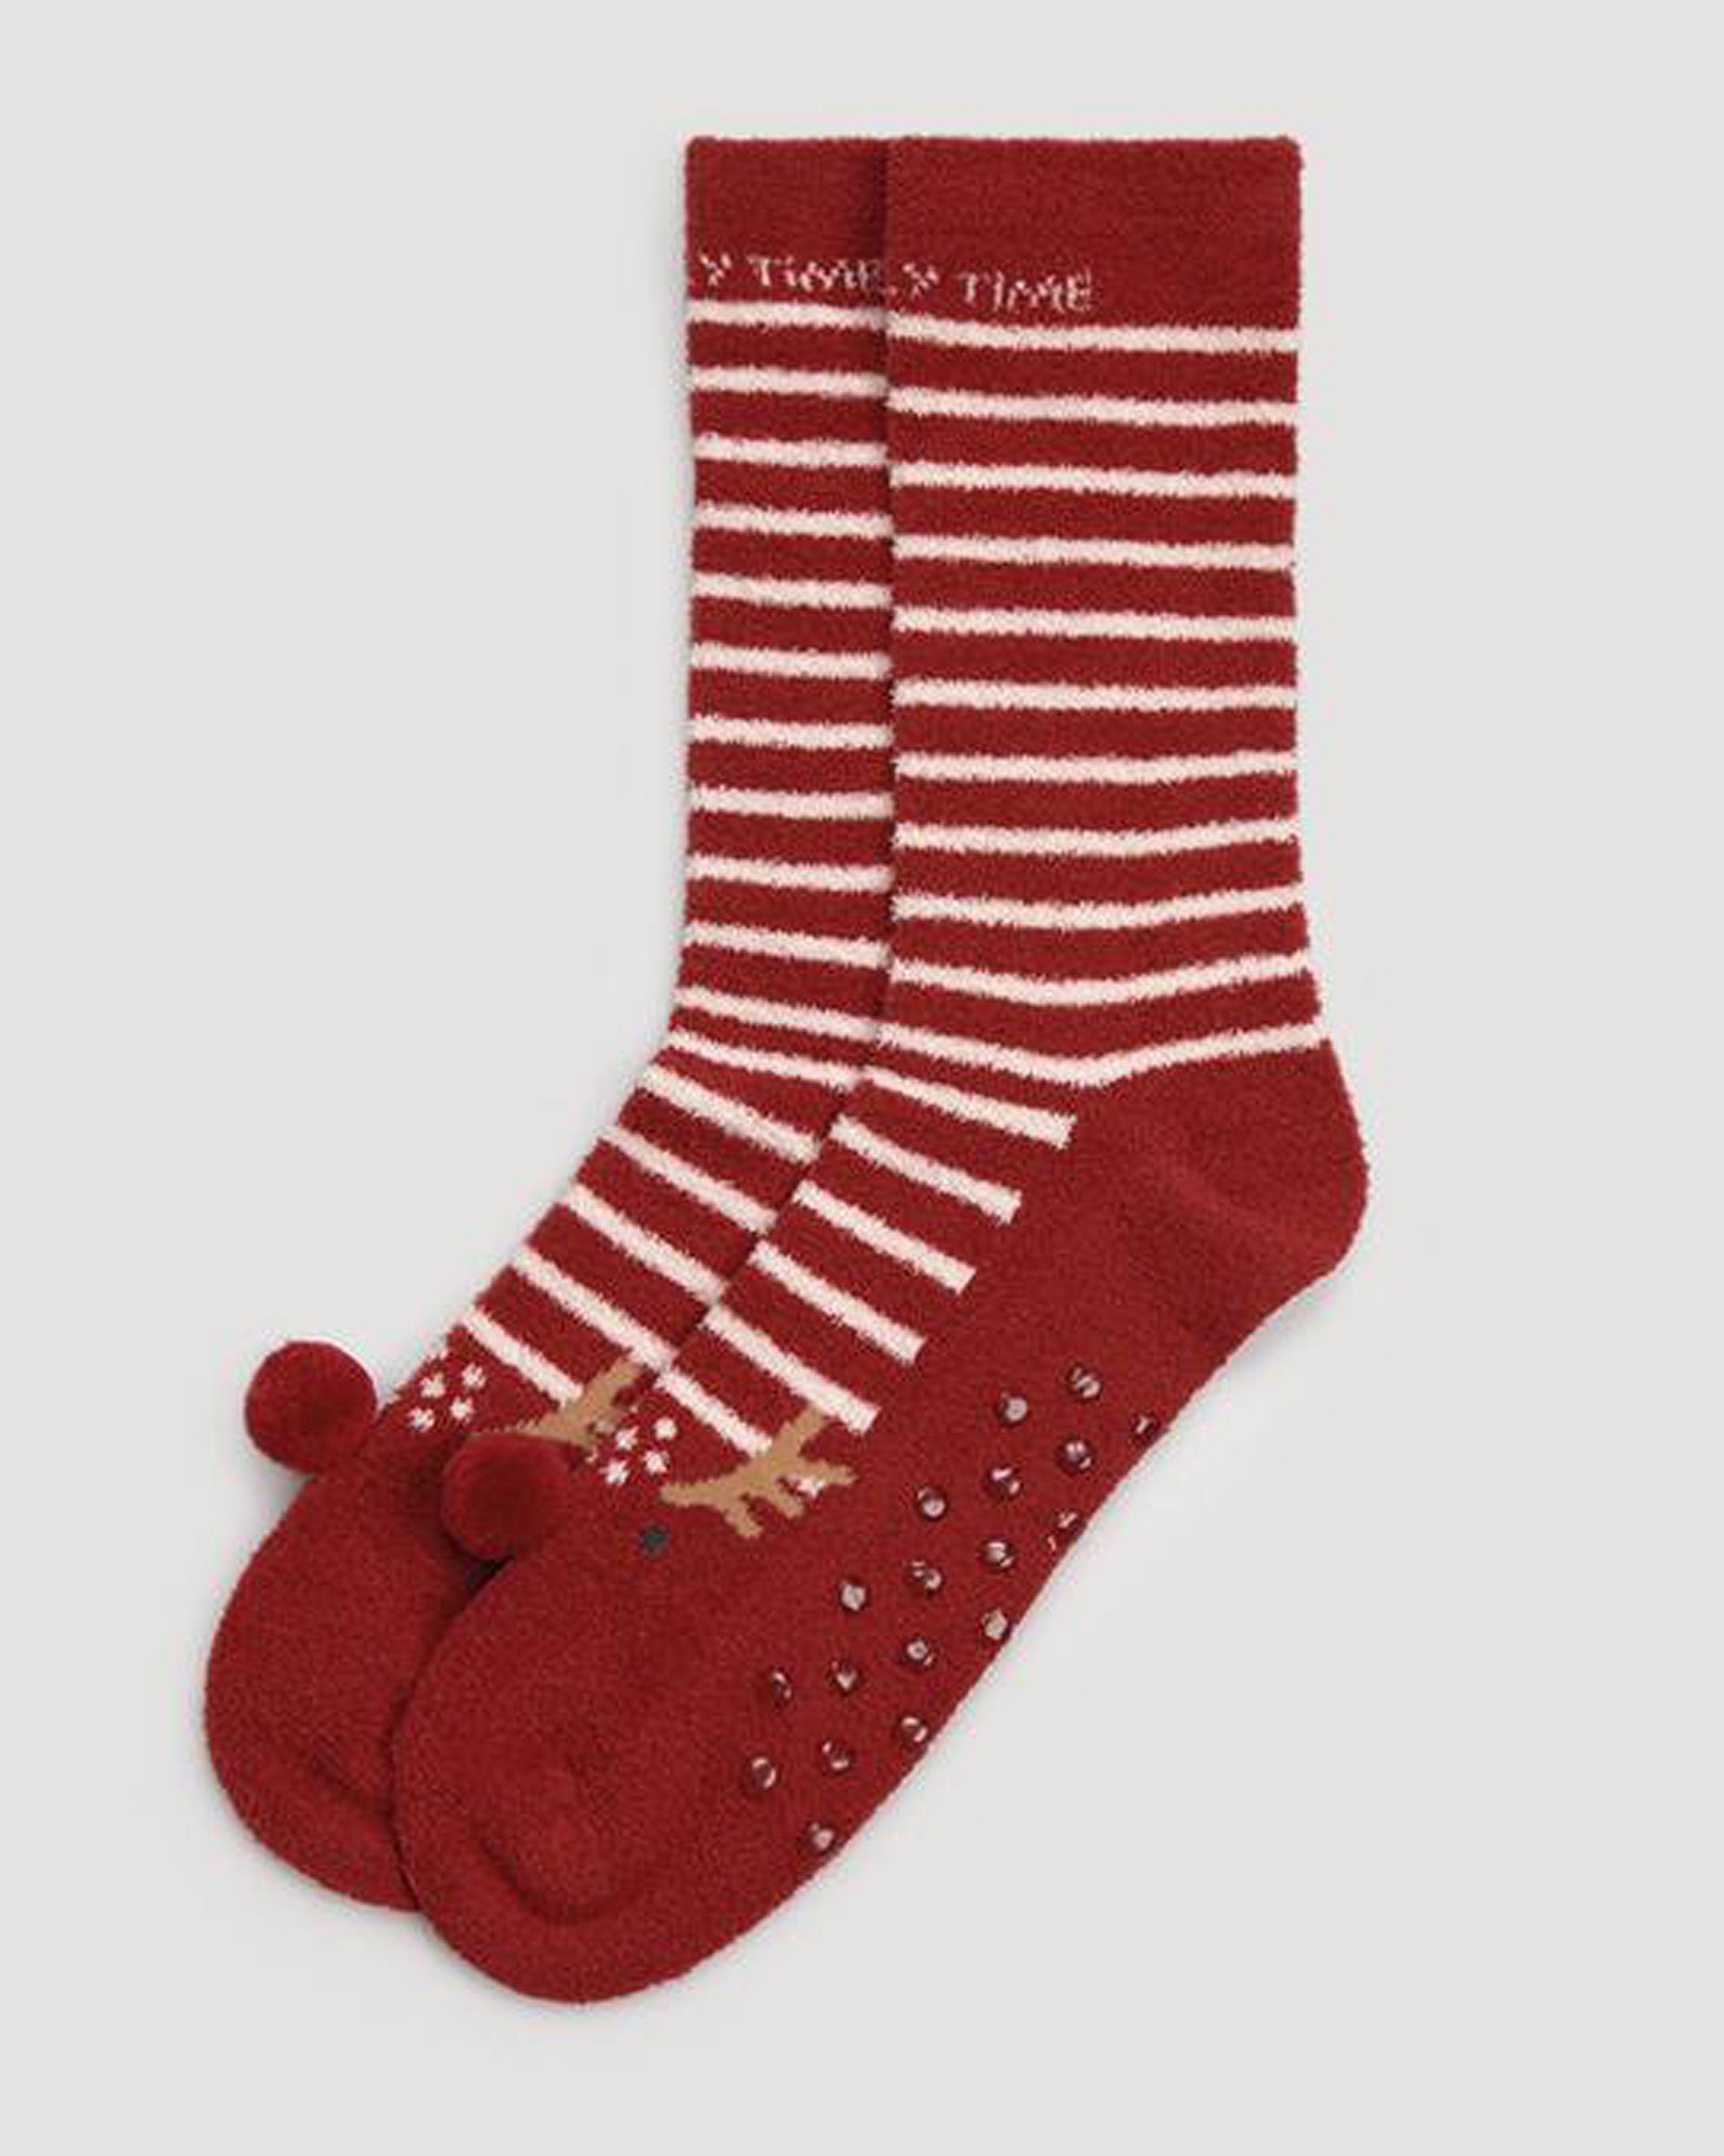 Ysabel Mora 12809 Rudolf Slipper Socks - Dark red fluffy flannel slipper socks gift box with a white stripe pattern, Rudolf at the toe with a red pom pom nose and the text 'Family Time' on the cuff. 